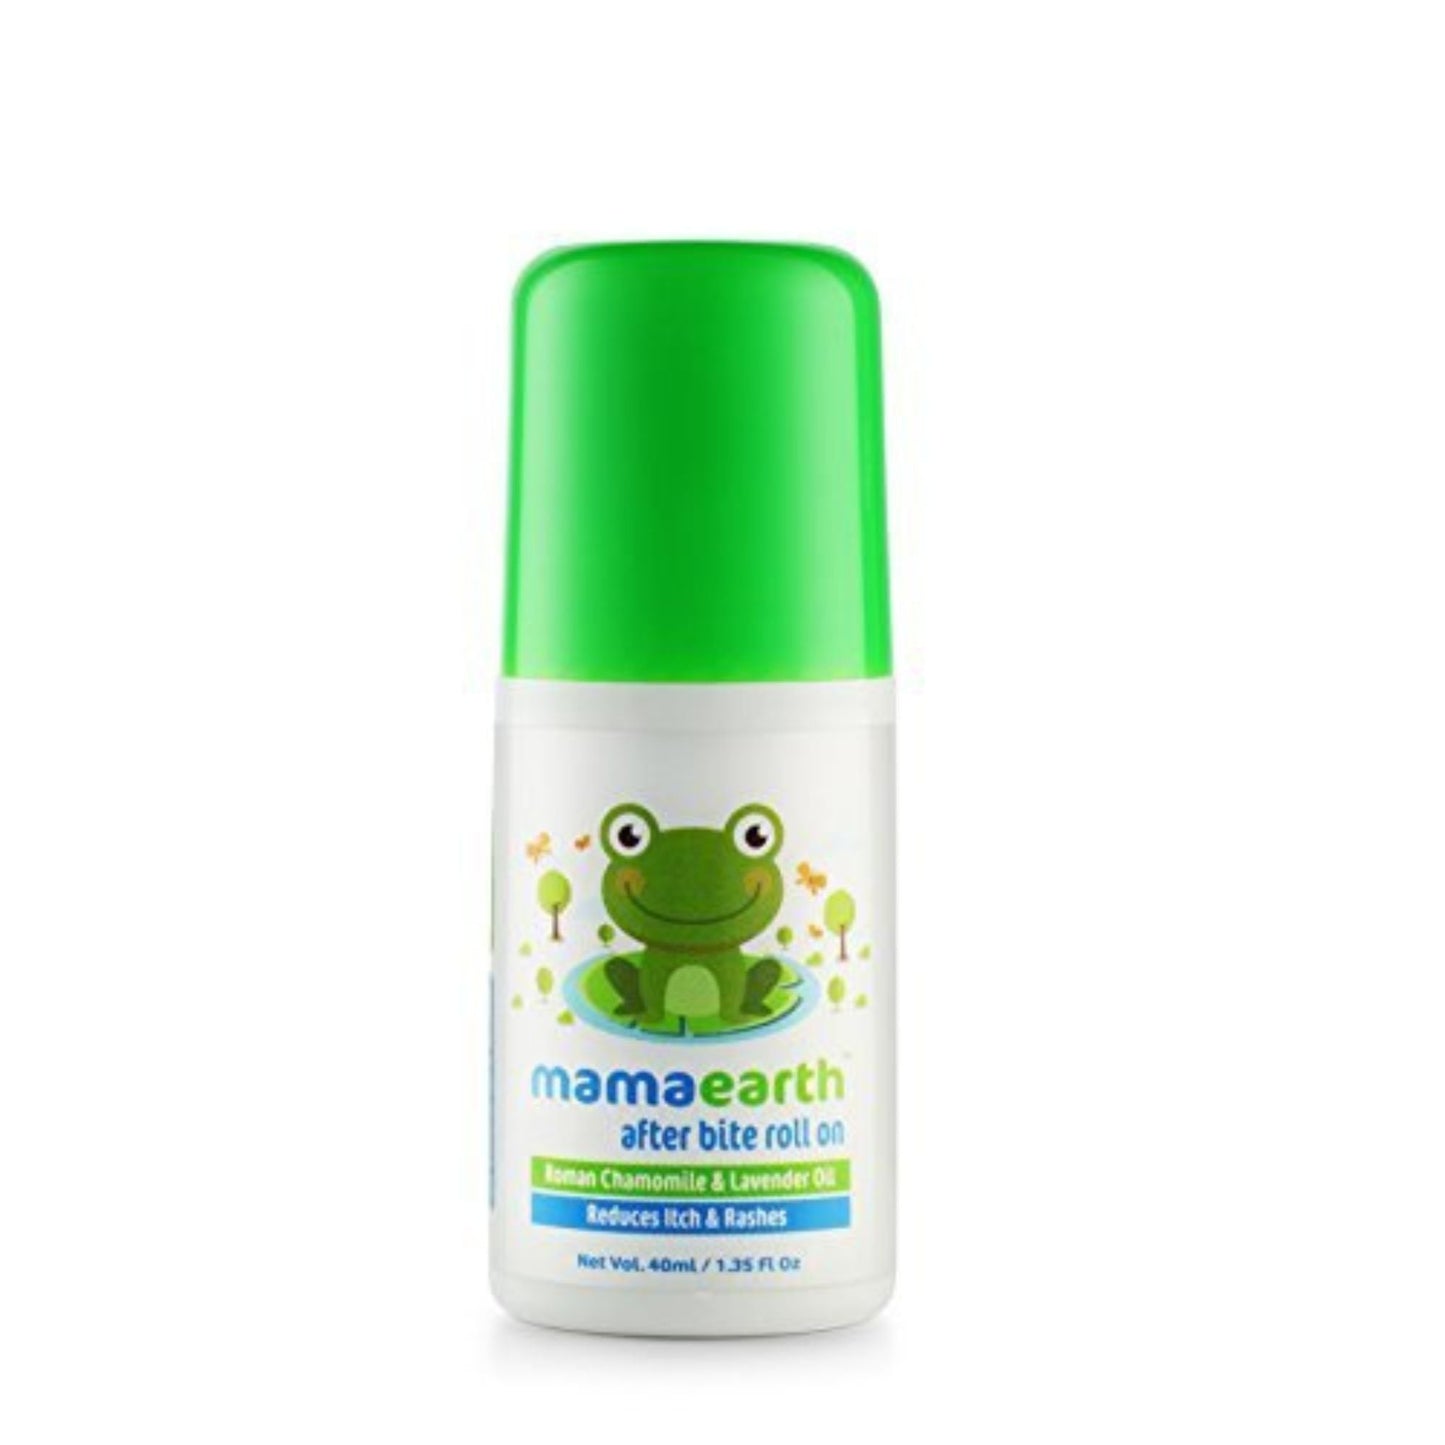 Mamaearth Natural Anti Mosquito Body Roll On, 40ml & After Bite Roll On for Rashes & Mosquito Bites with Lavander & Witchhazel, 40ml Combo